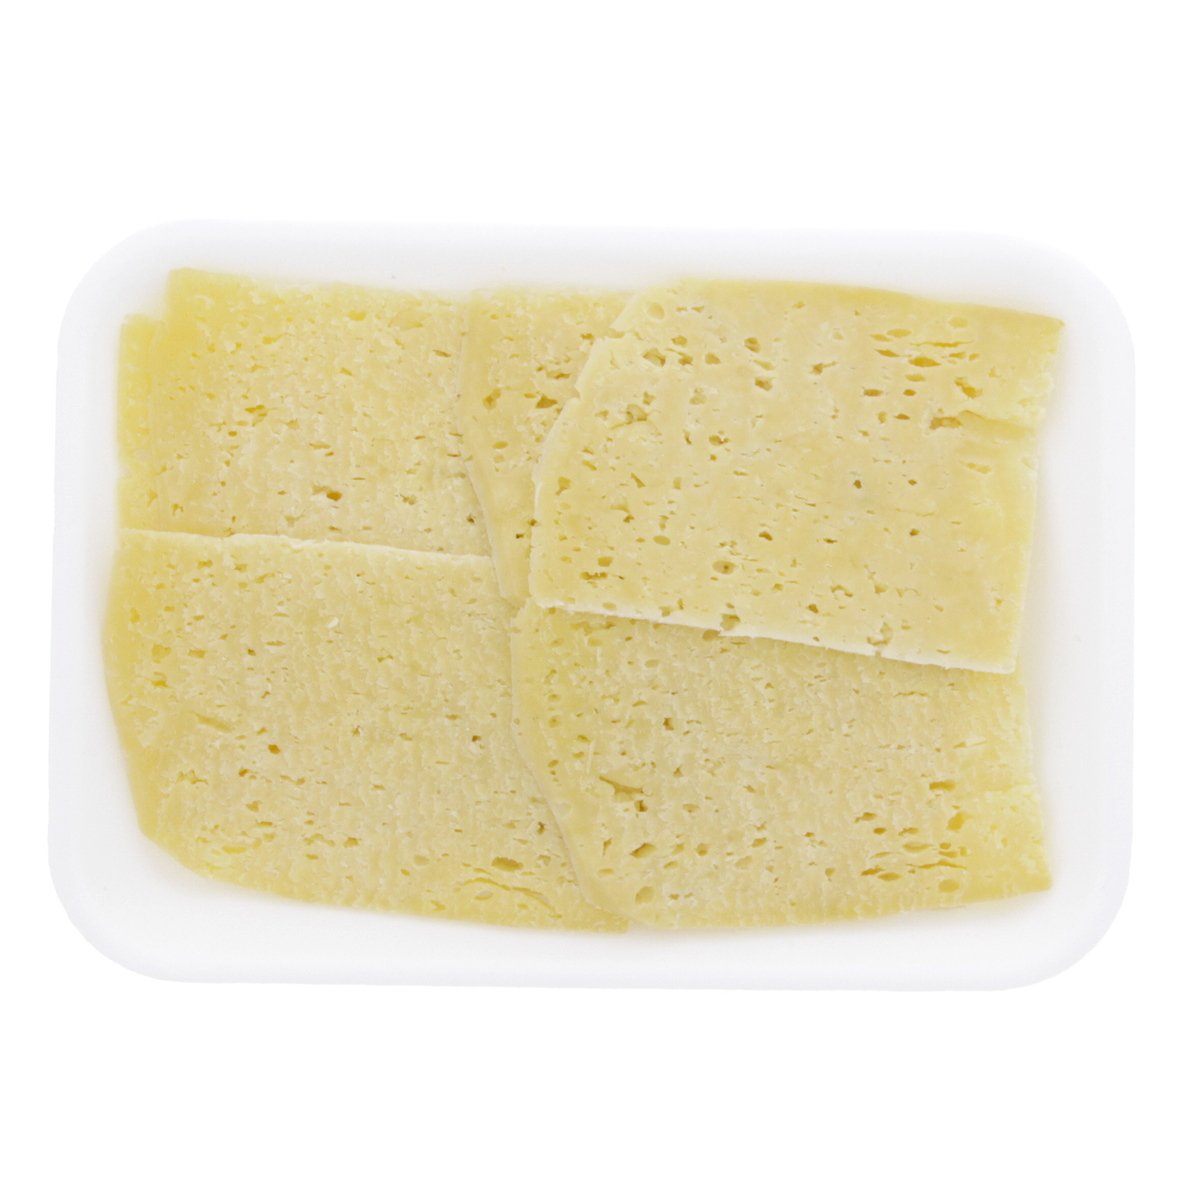 Buy Egyptian Old Roumy Cheese 300 g Online at Best Price | White Cheese | Lulu Egypt in Saudi Arabia